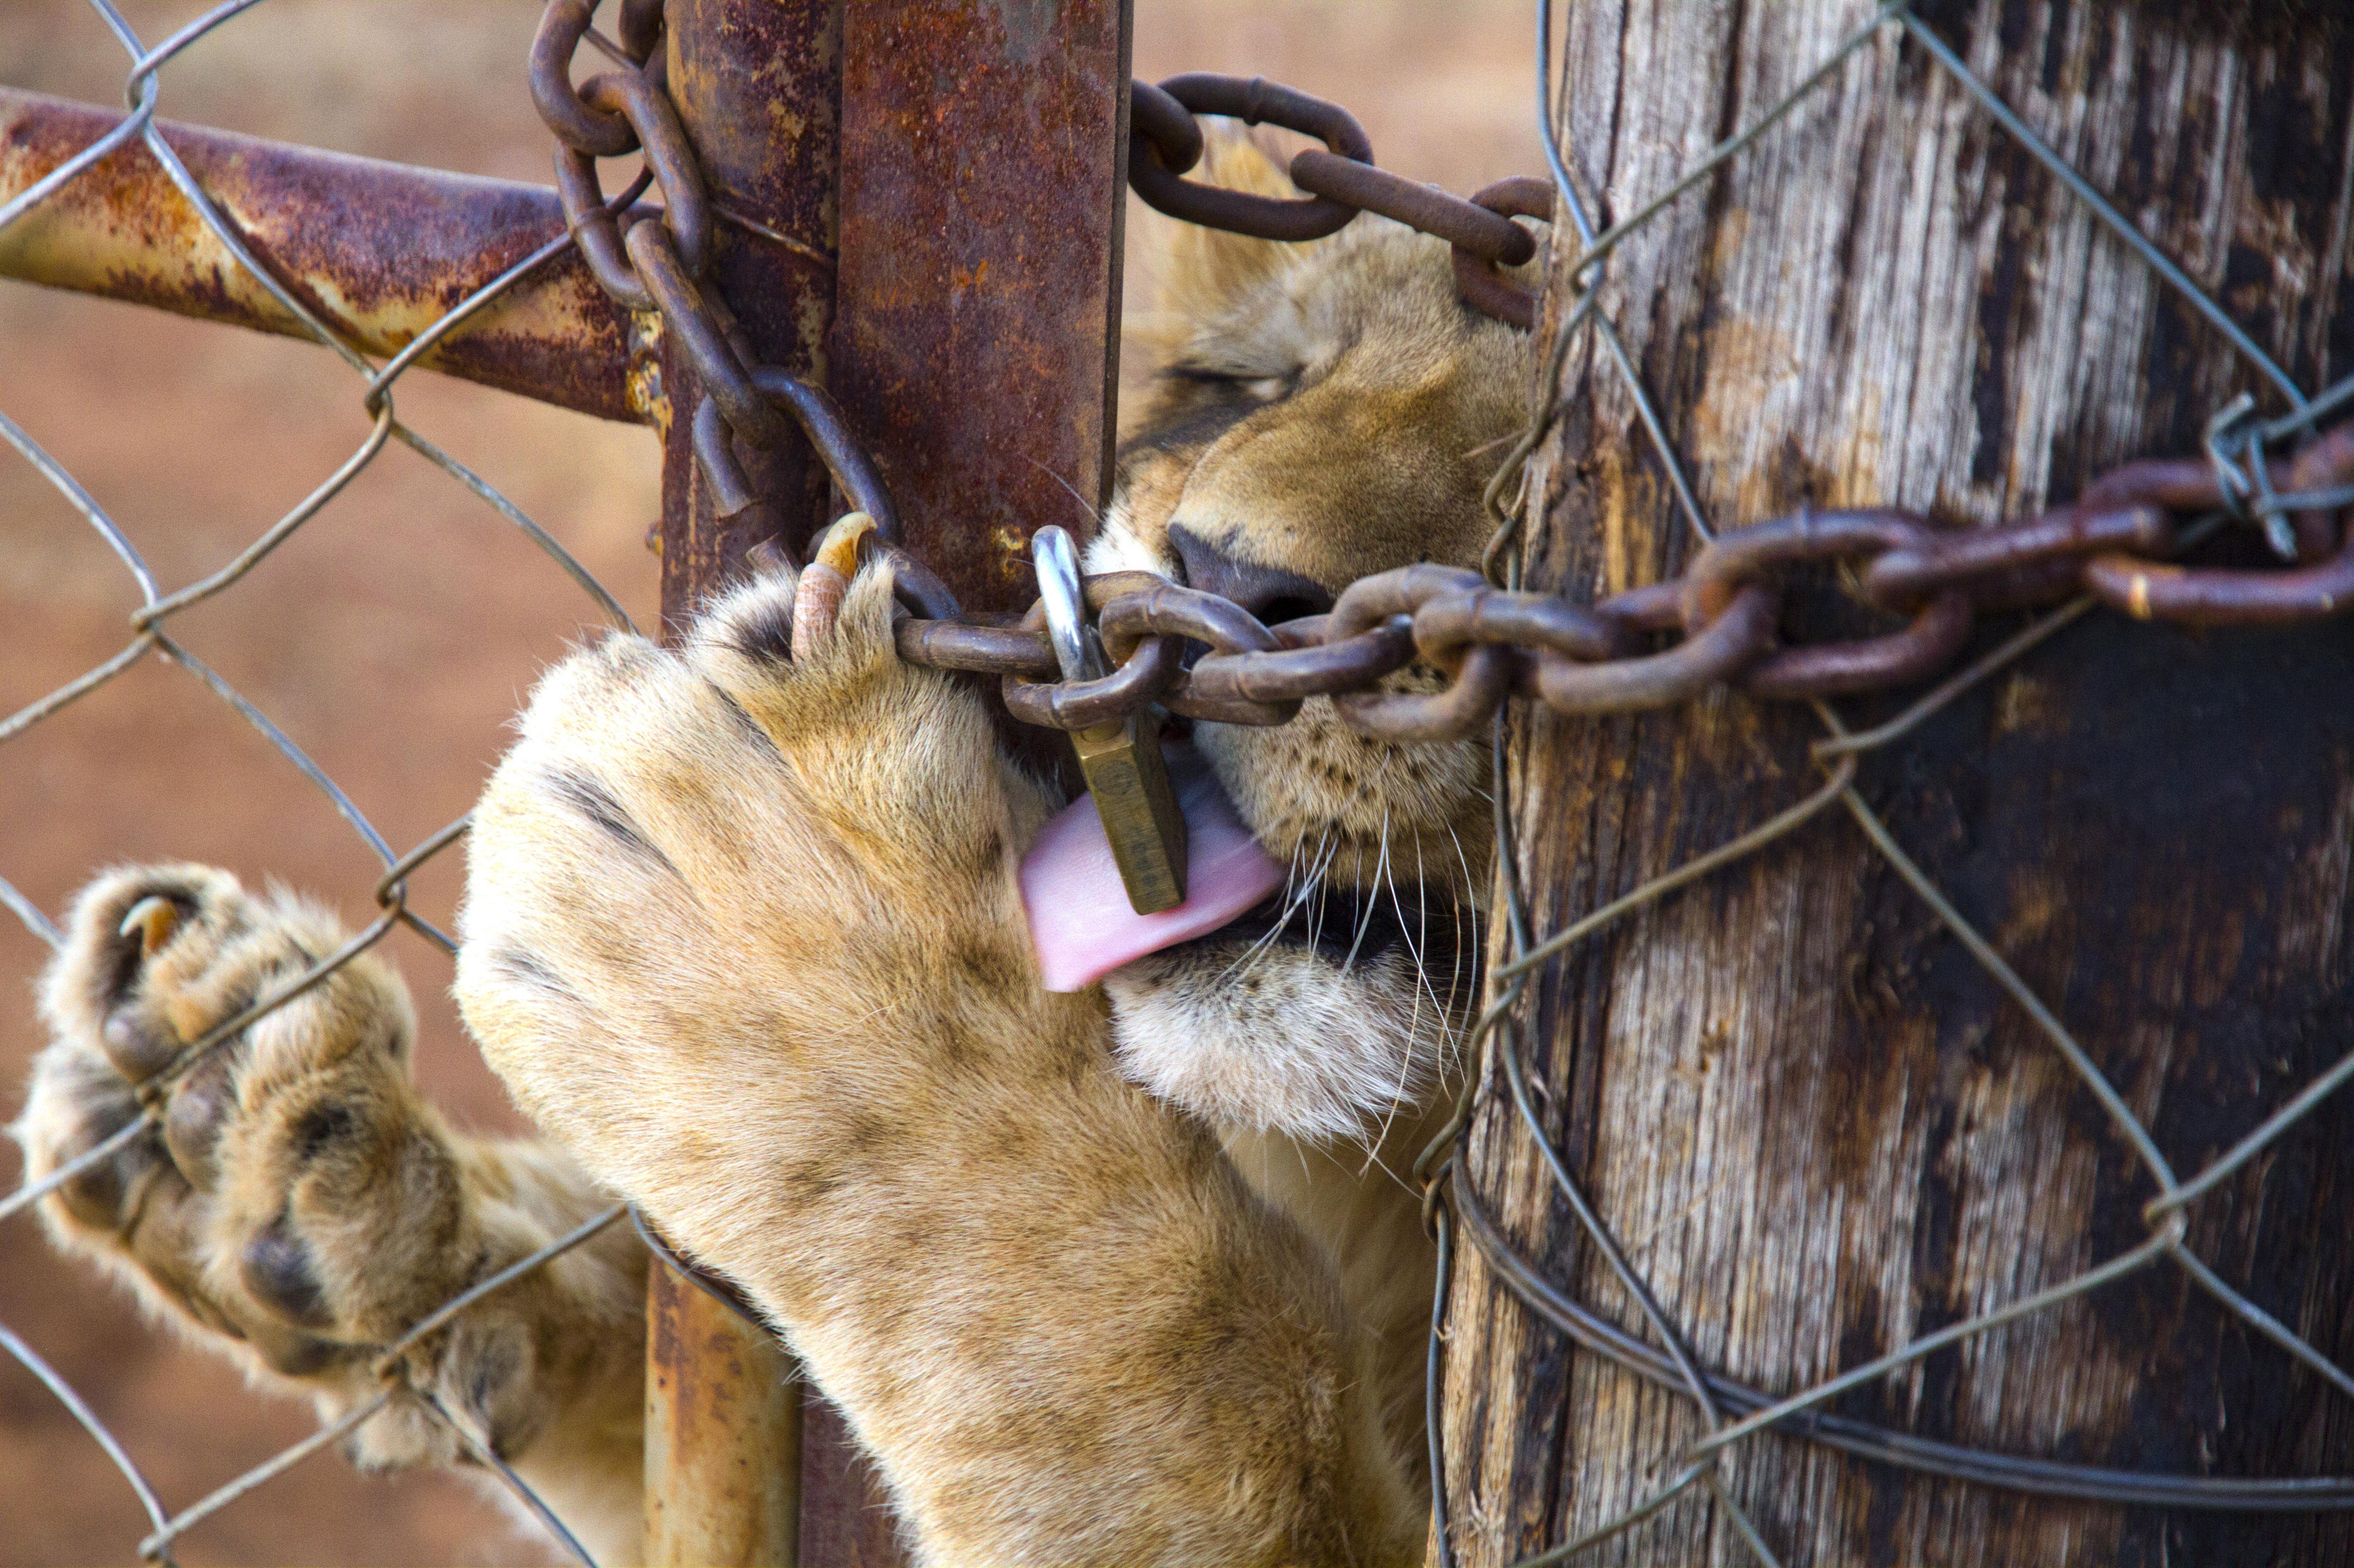 Captive lions in South Africa: this is what their fate...